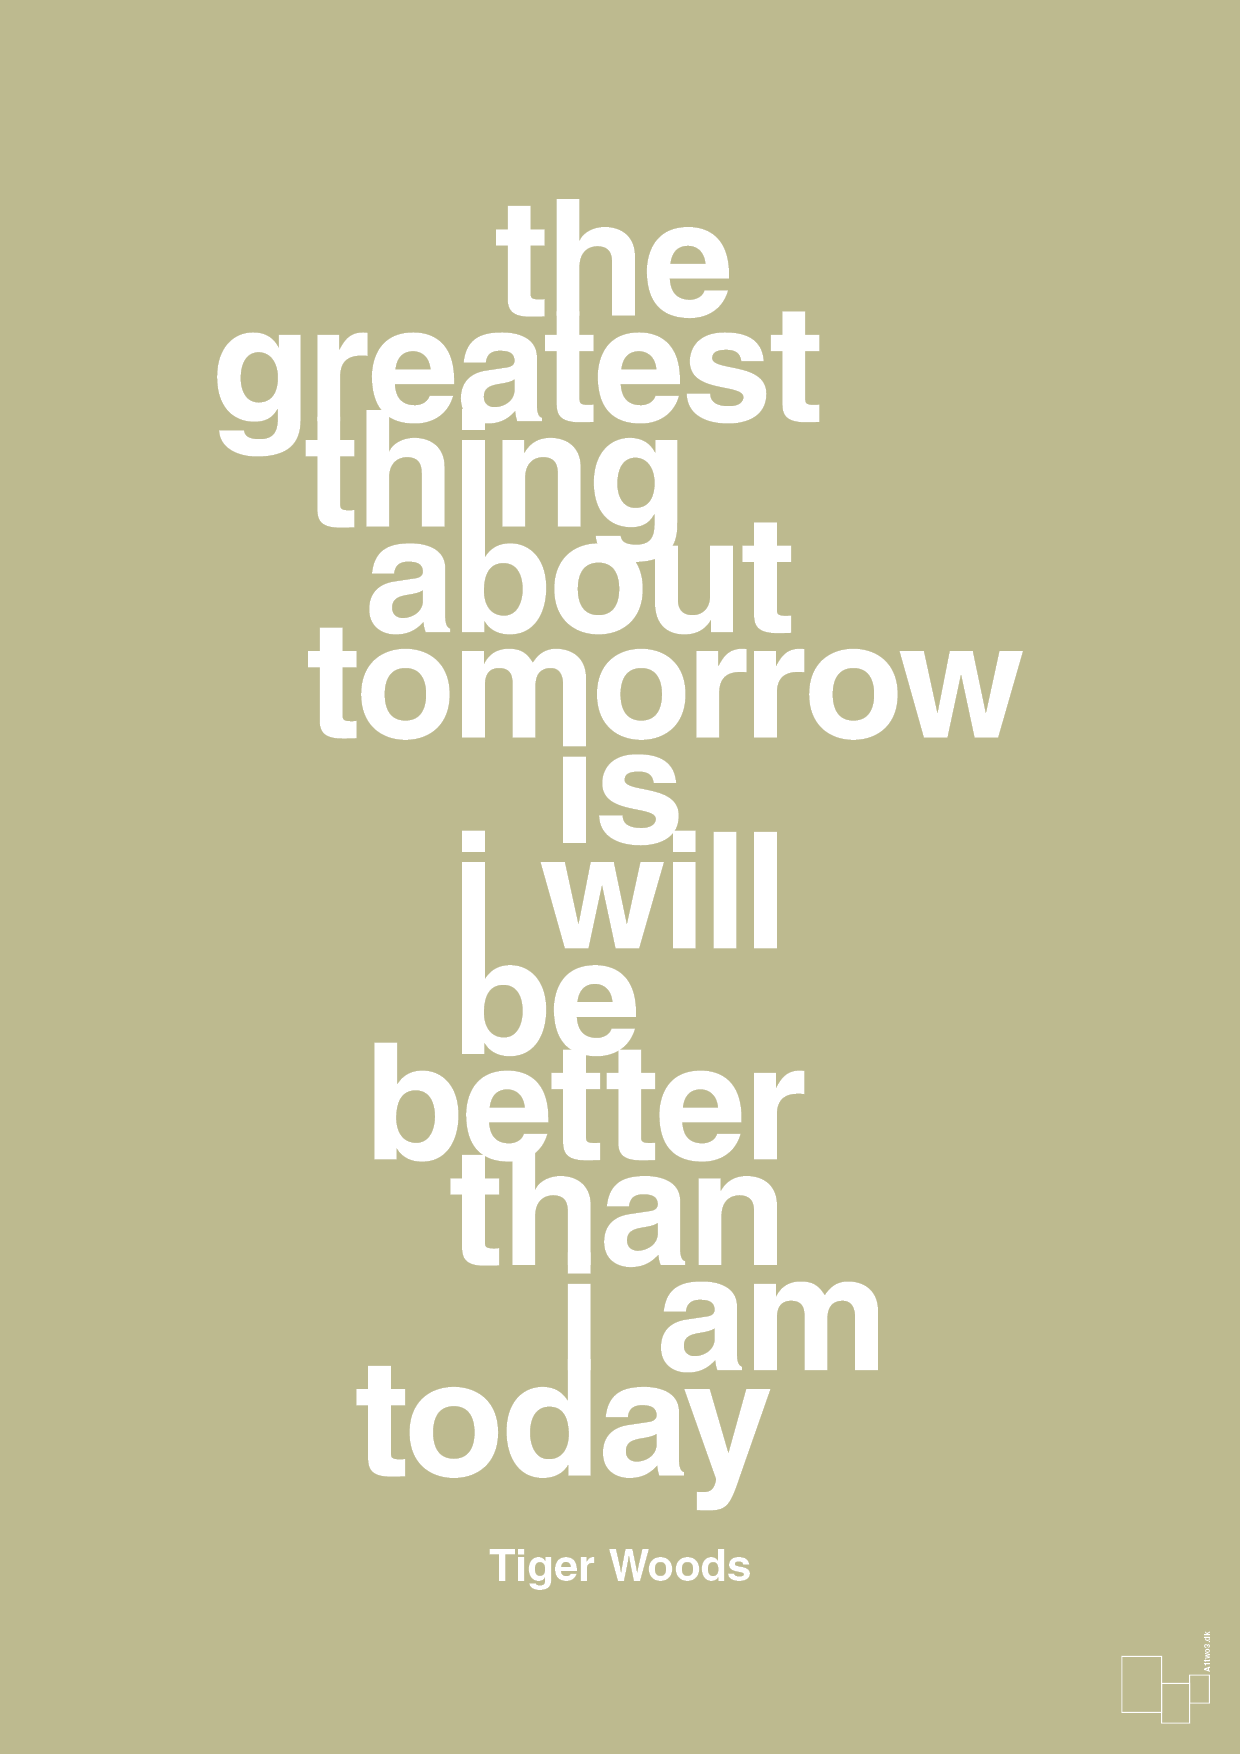 the greatest thing about tomorrow is i will be better than i am today - Plakat med Citater i Back to Nature